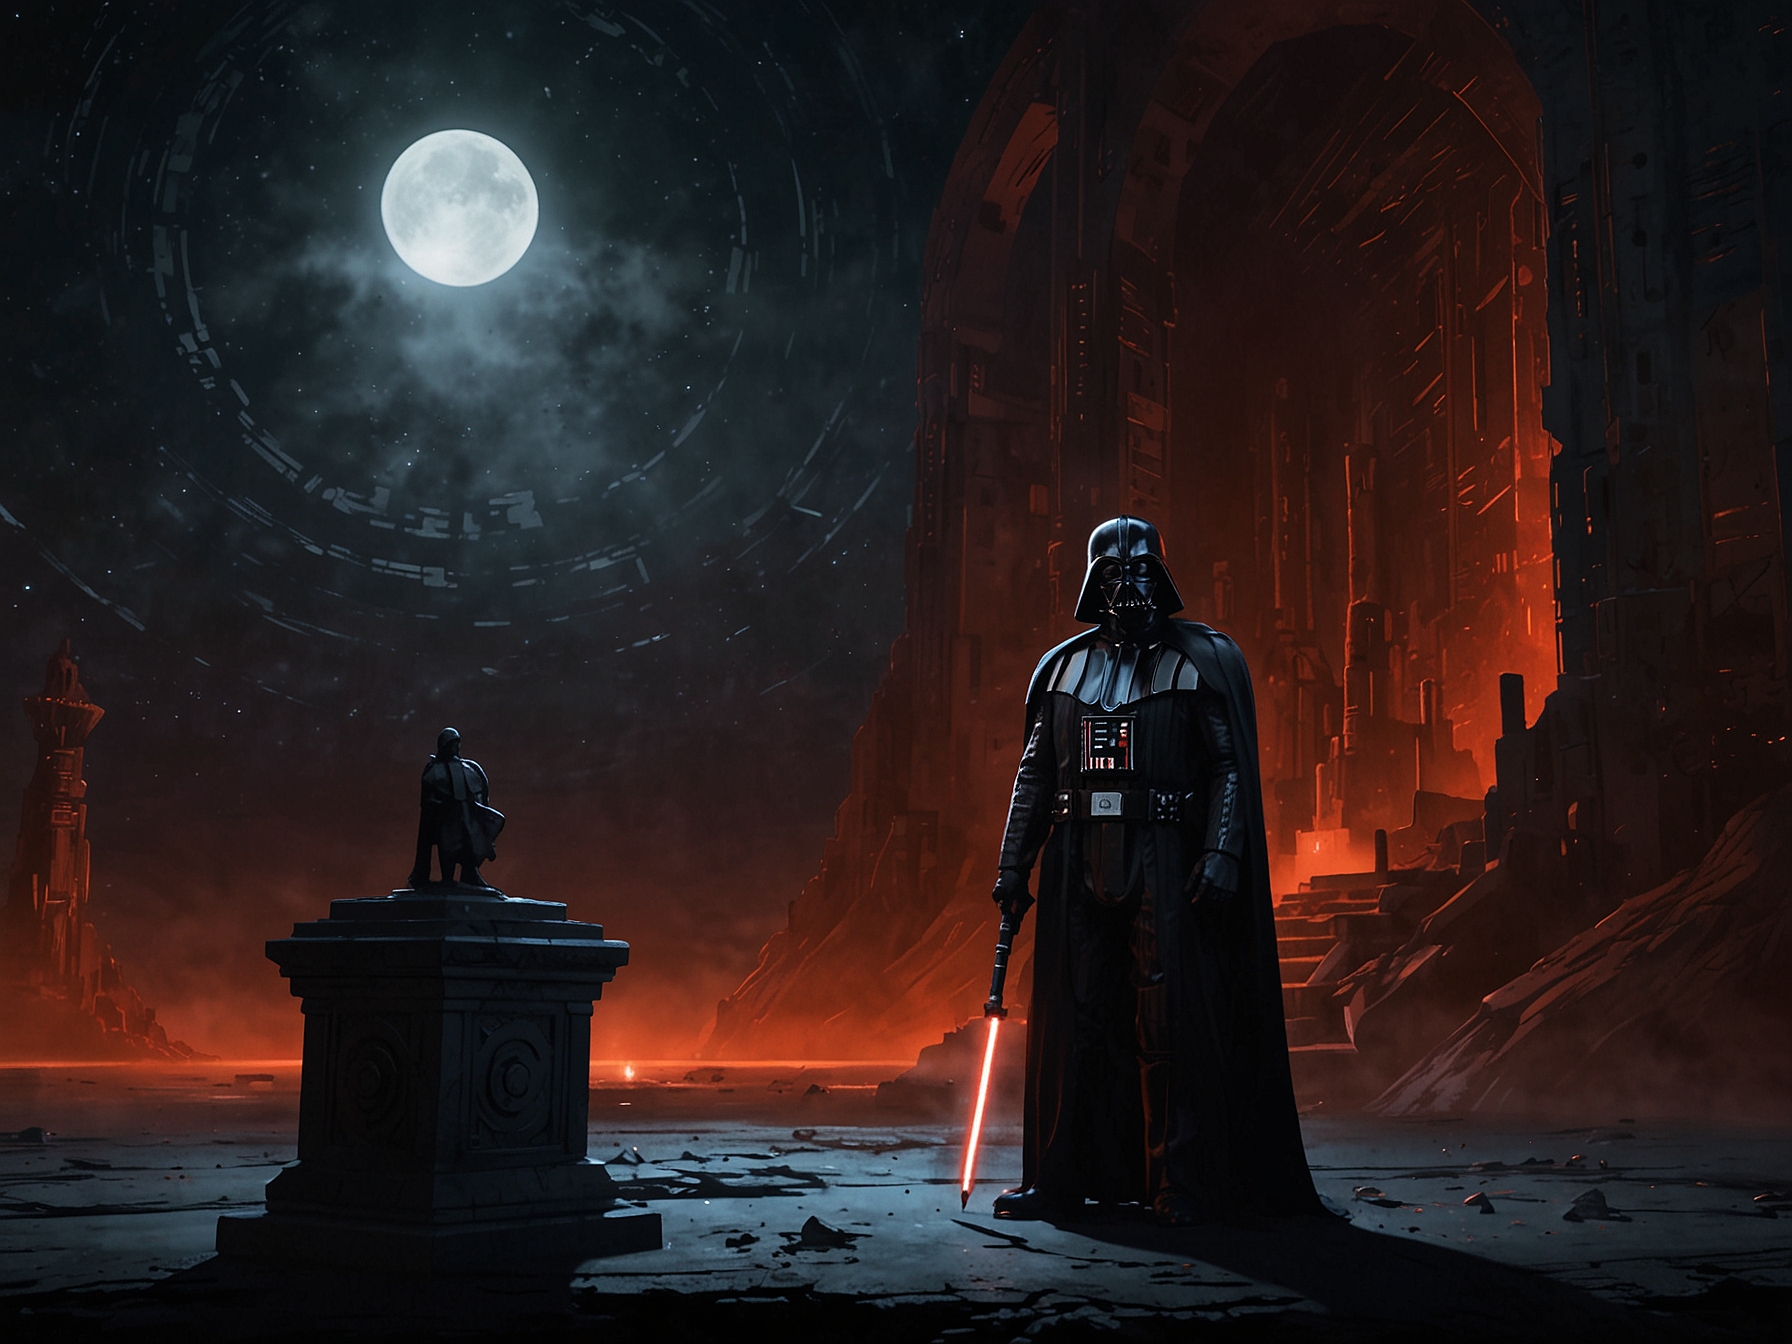 Promotional image of 'The Acolyte', showcasing a dark and mysterious atmosphere with intricate character visuals and stunning special effects, highlighting the show's deep dive into the Star Wars universe.